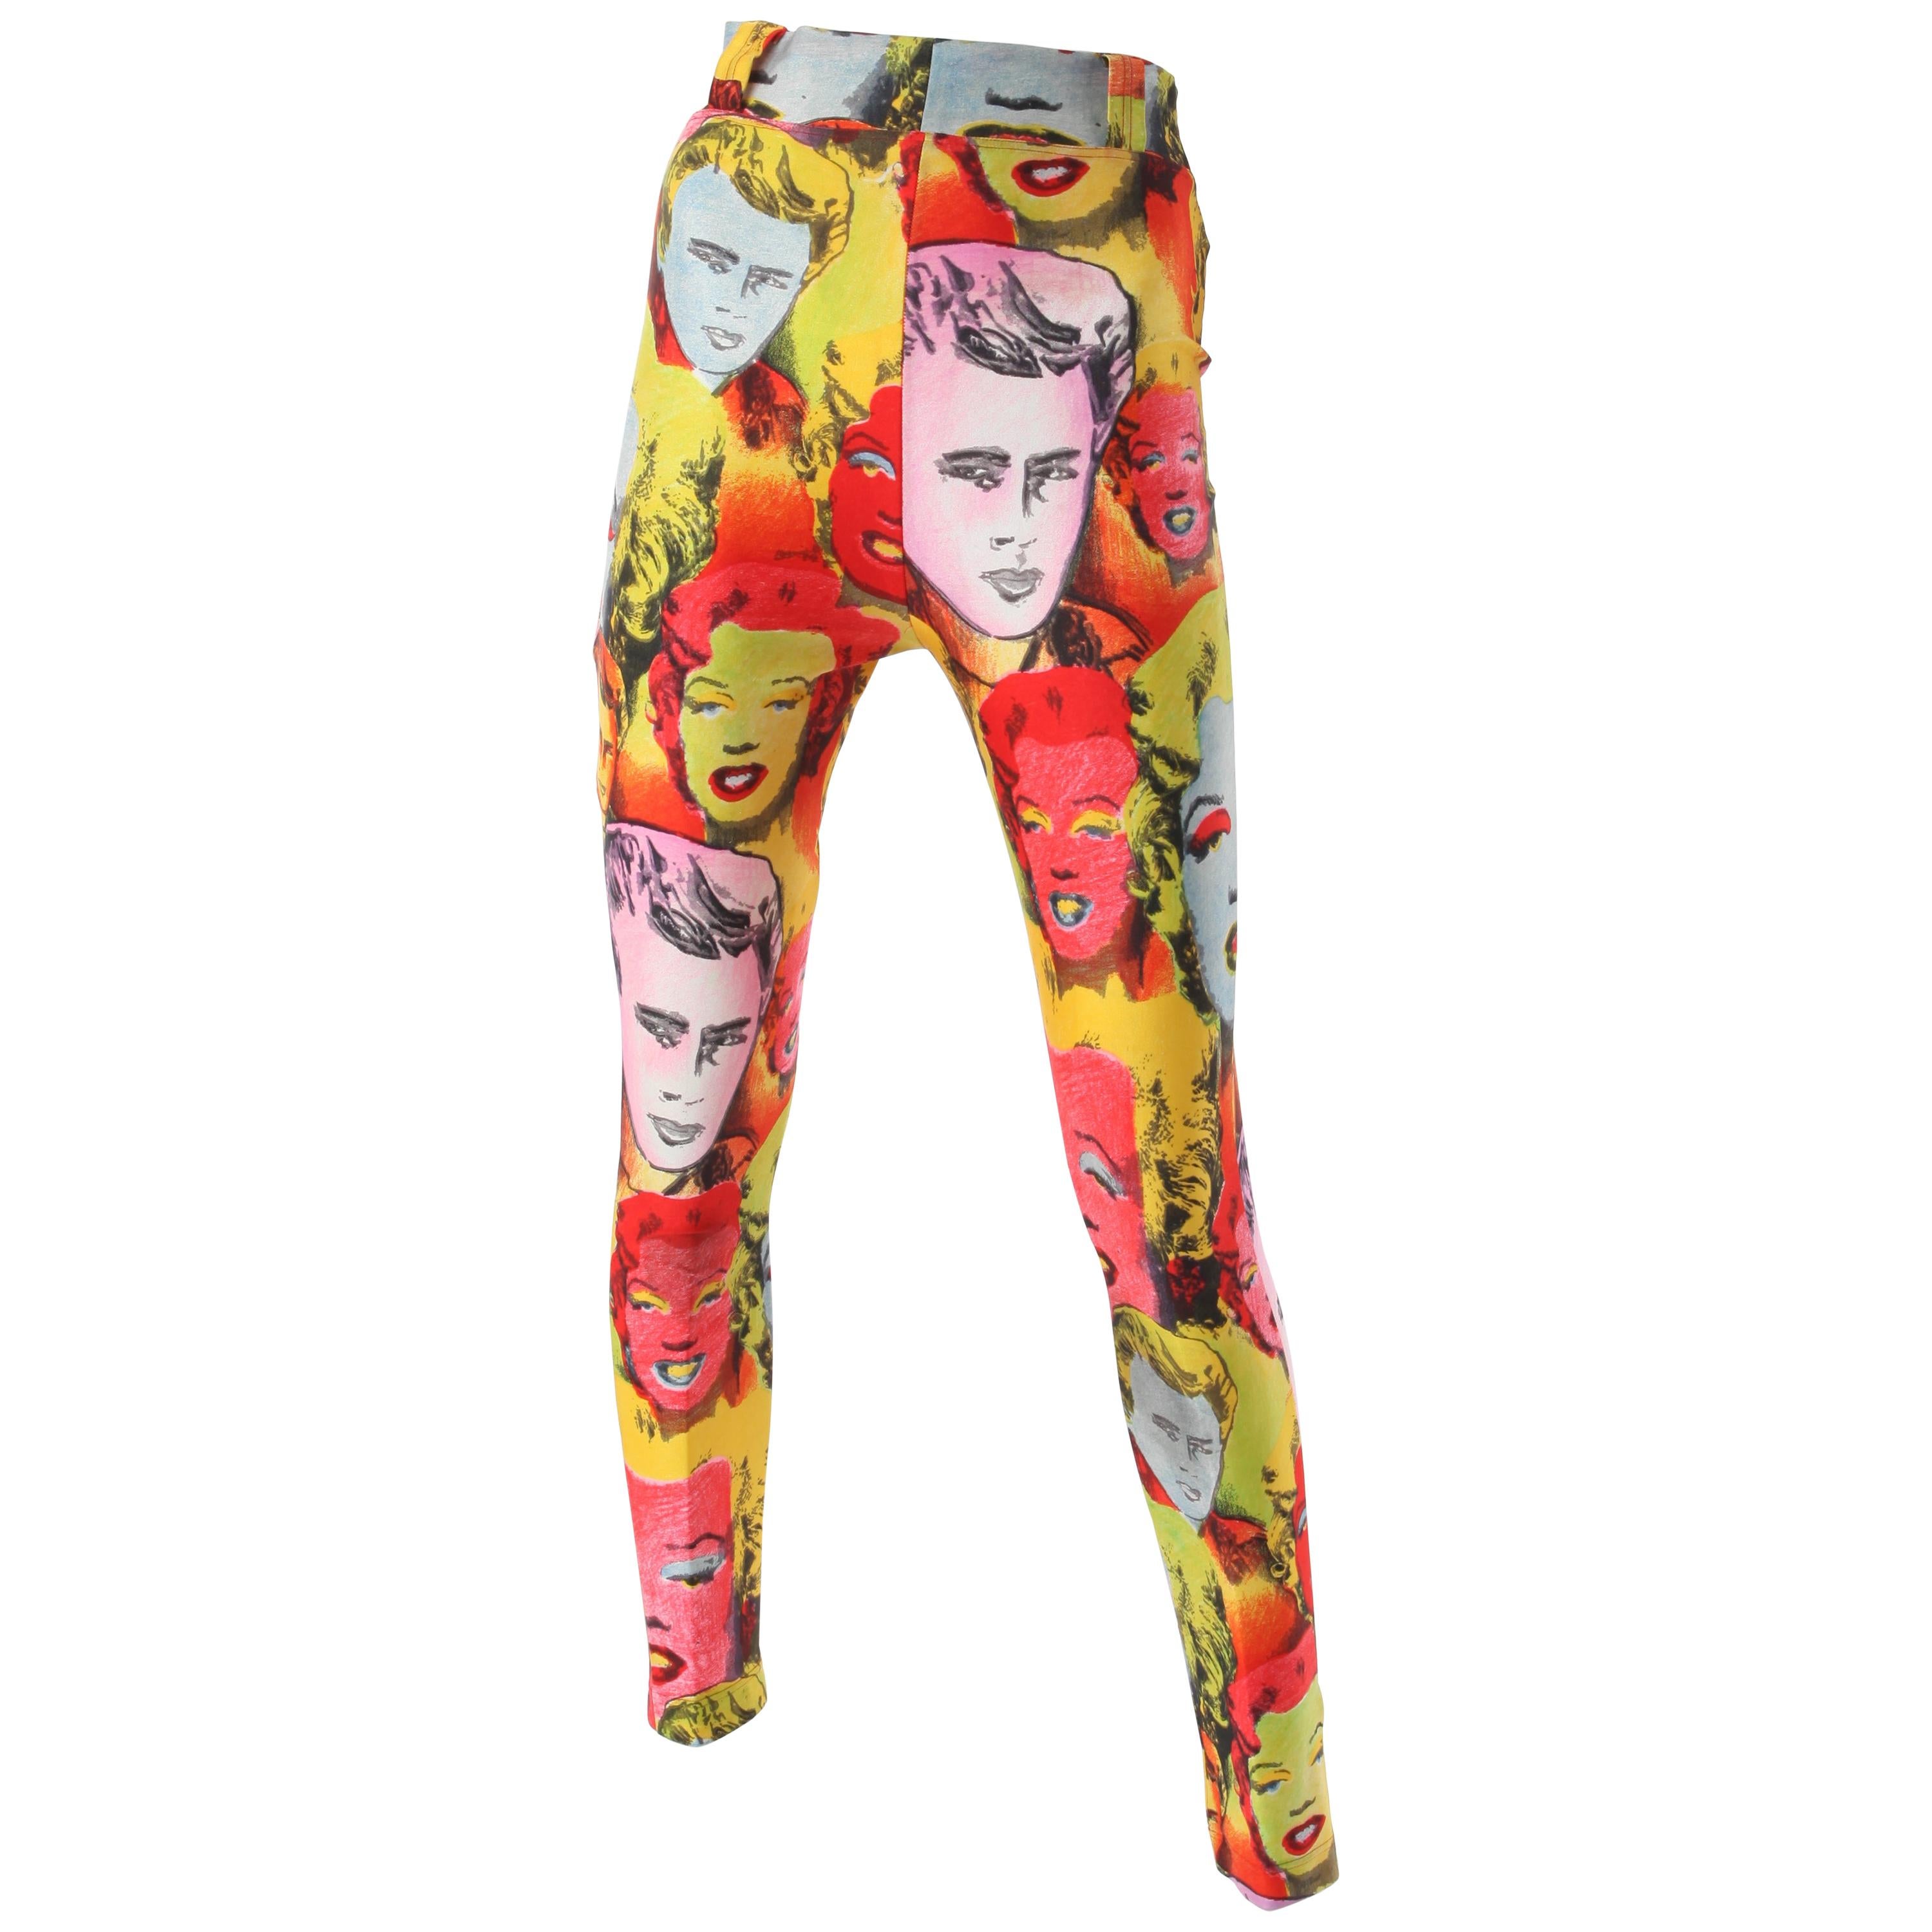 Gianni Versace Couture Andy Warhol Screen Printed Legging, c.1990 For Sale